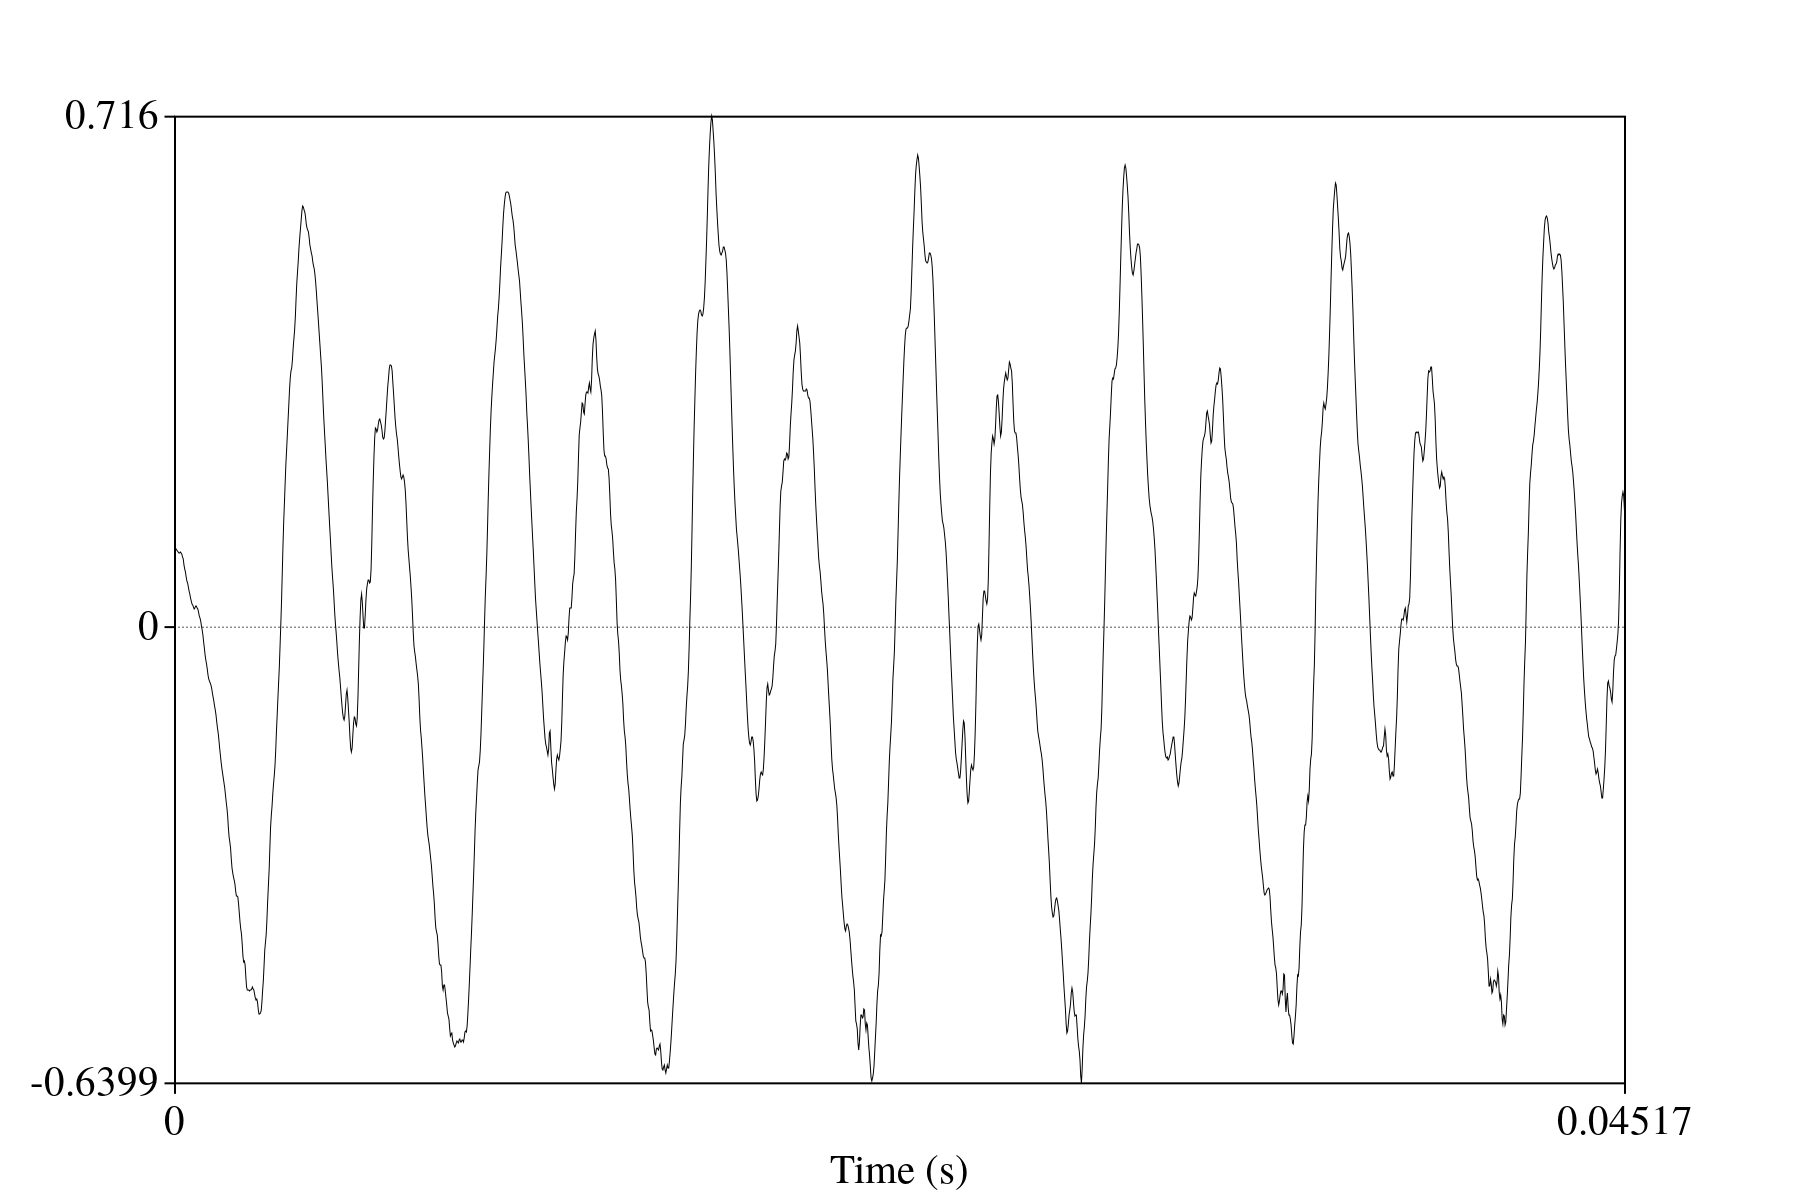 Figure 3: Zoomed-in slice of waveform for the [i] in the recording of "speech"